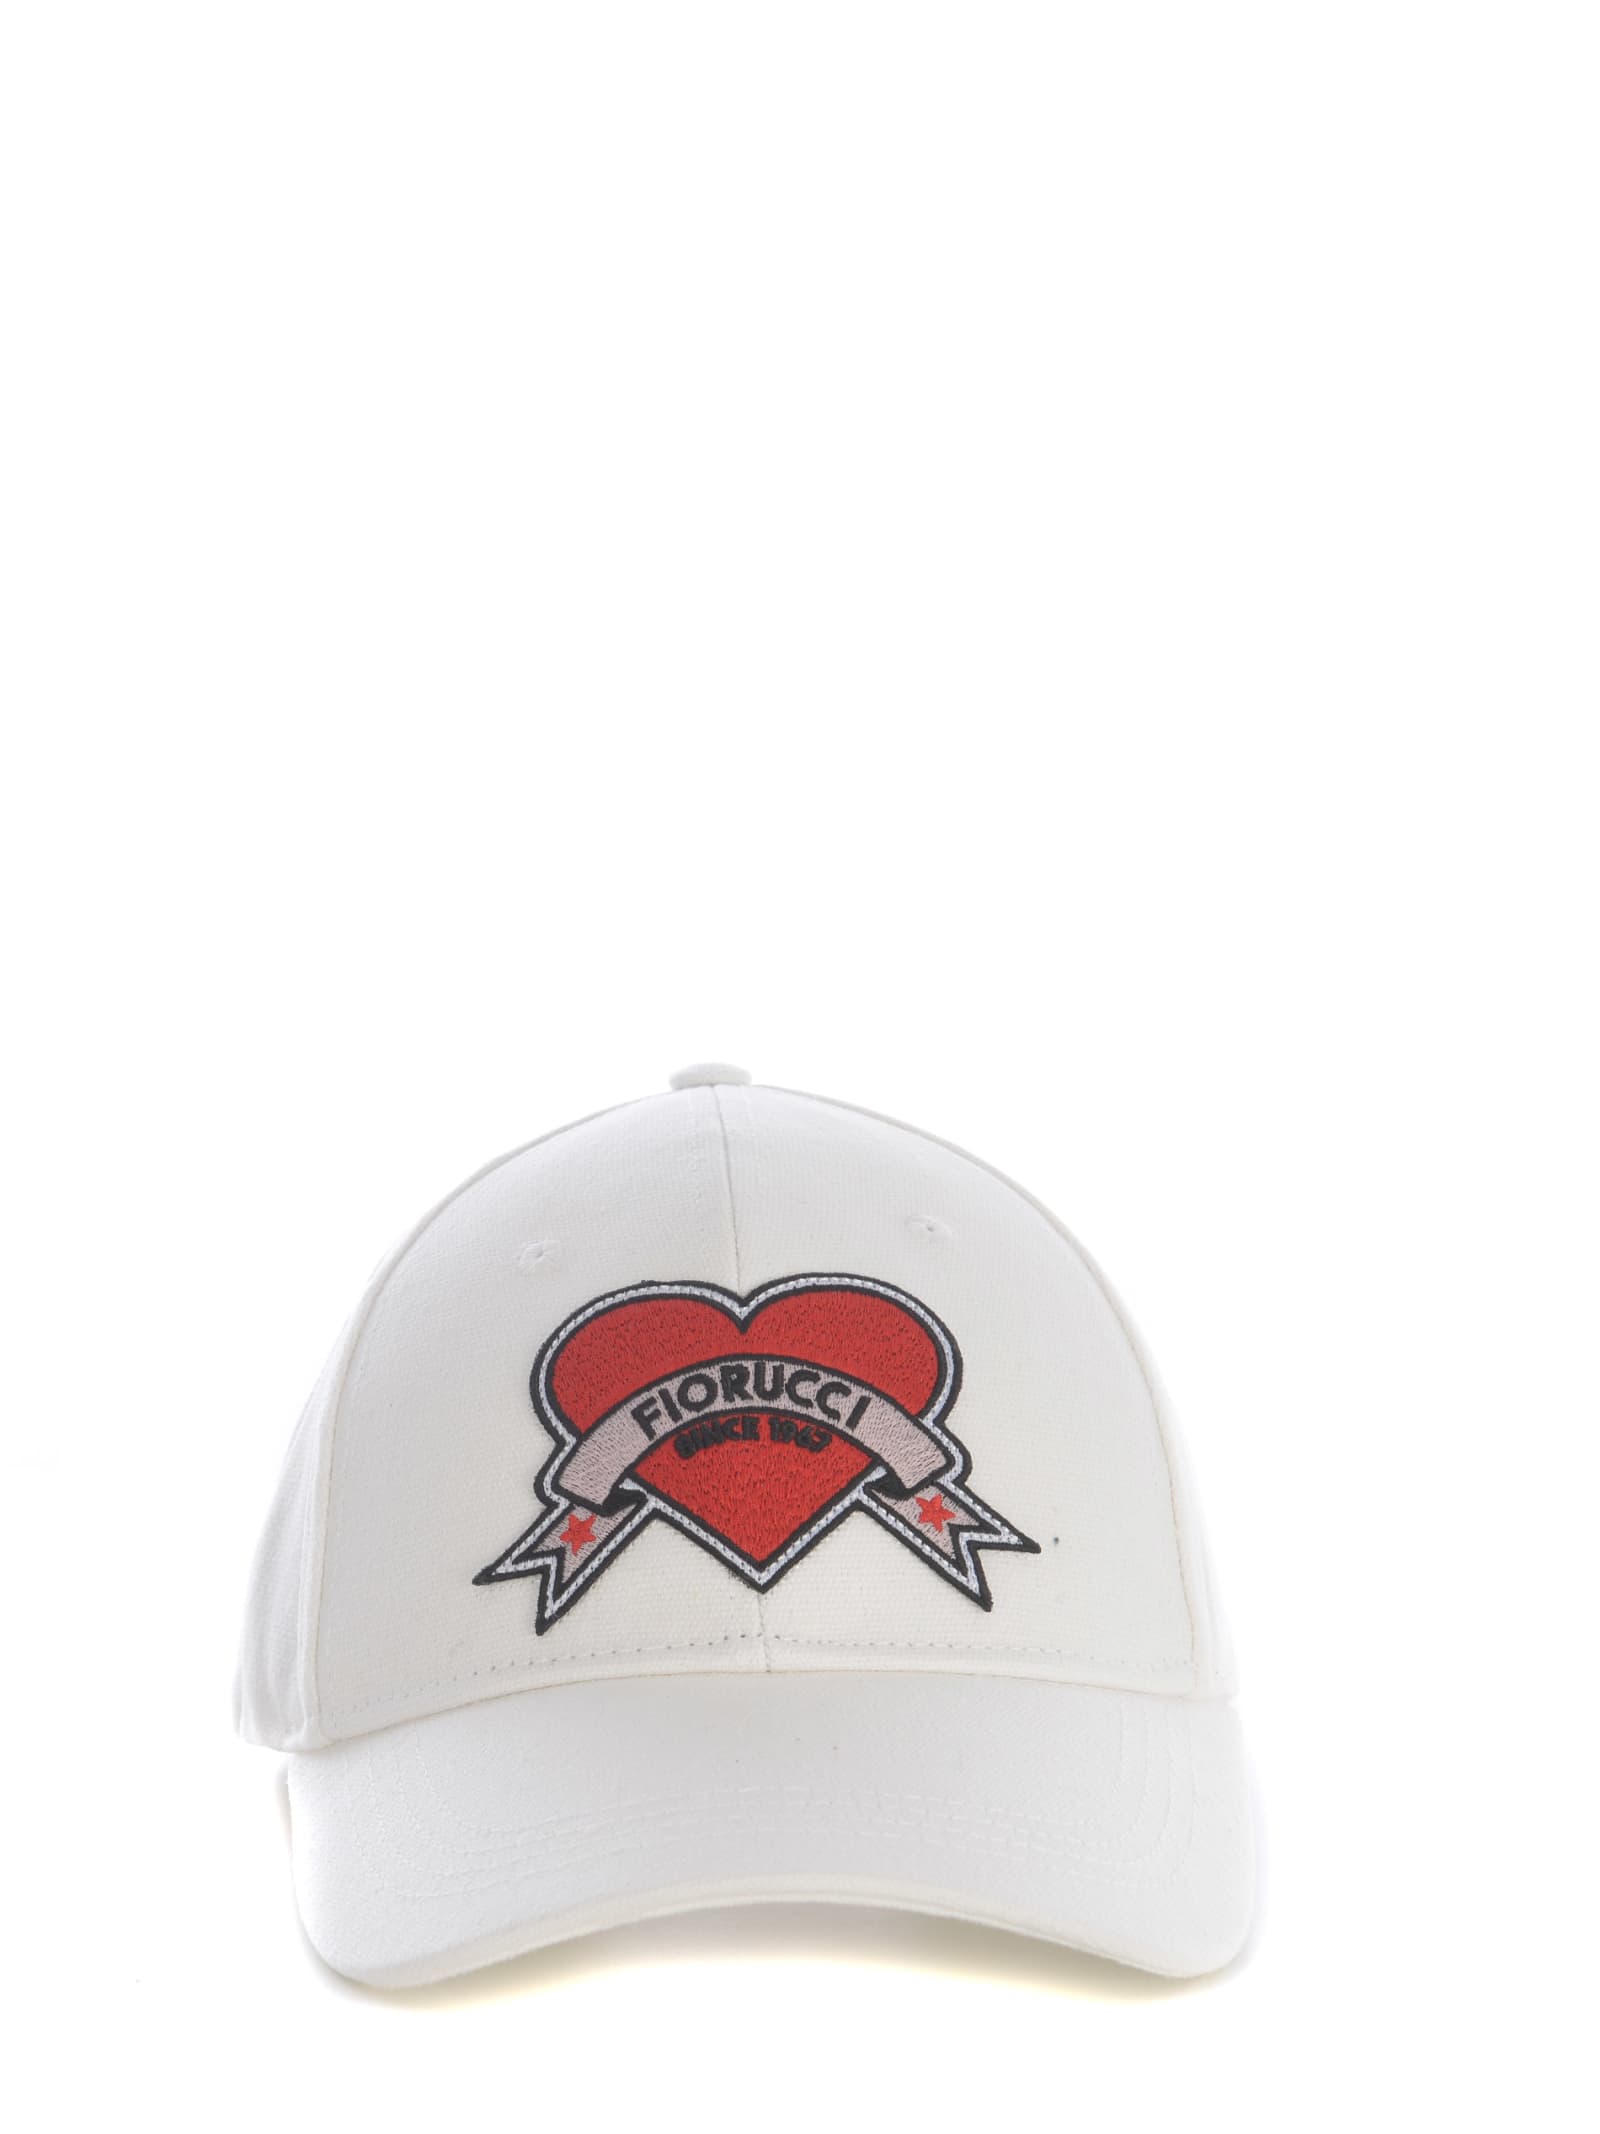 Hat Fiorucci heart Made Of Cotton